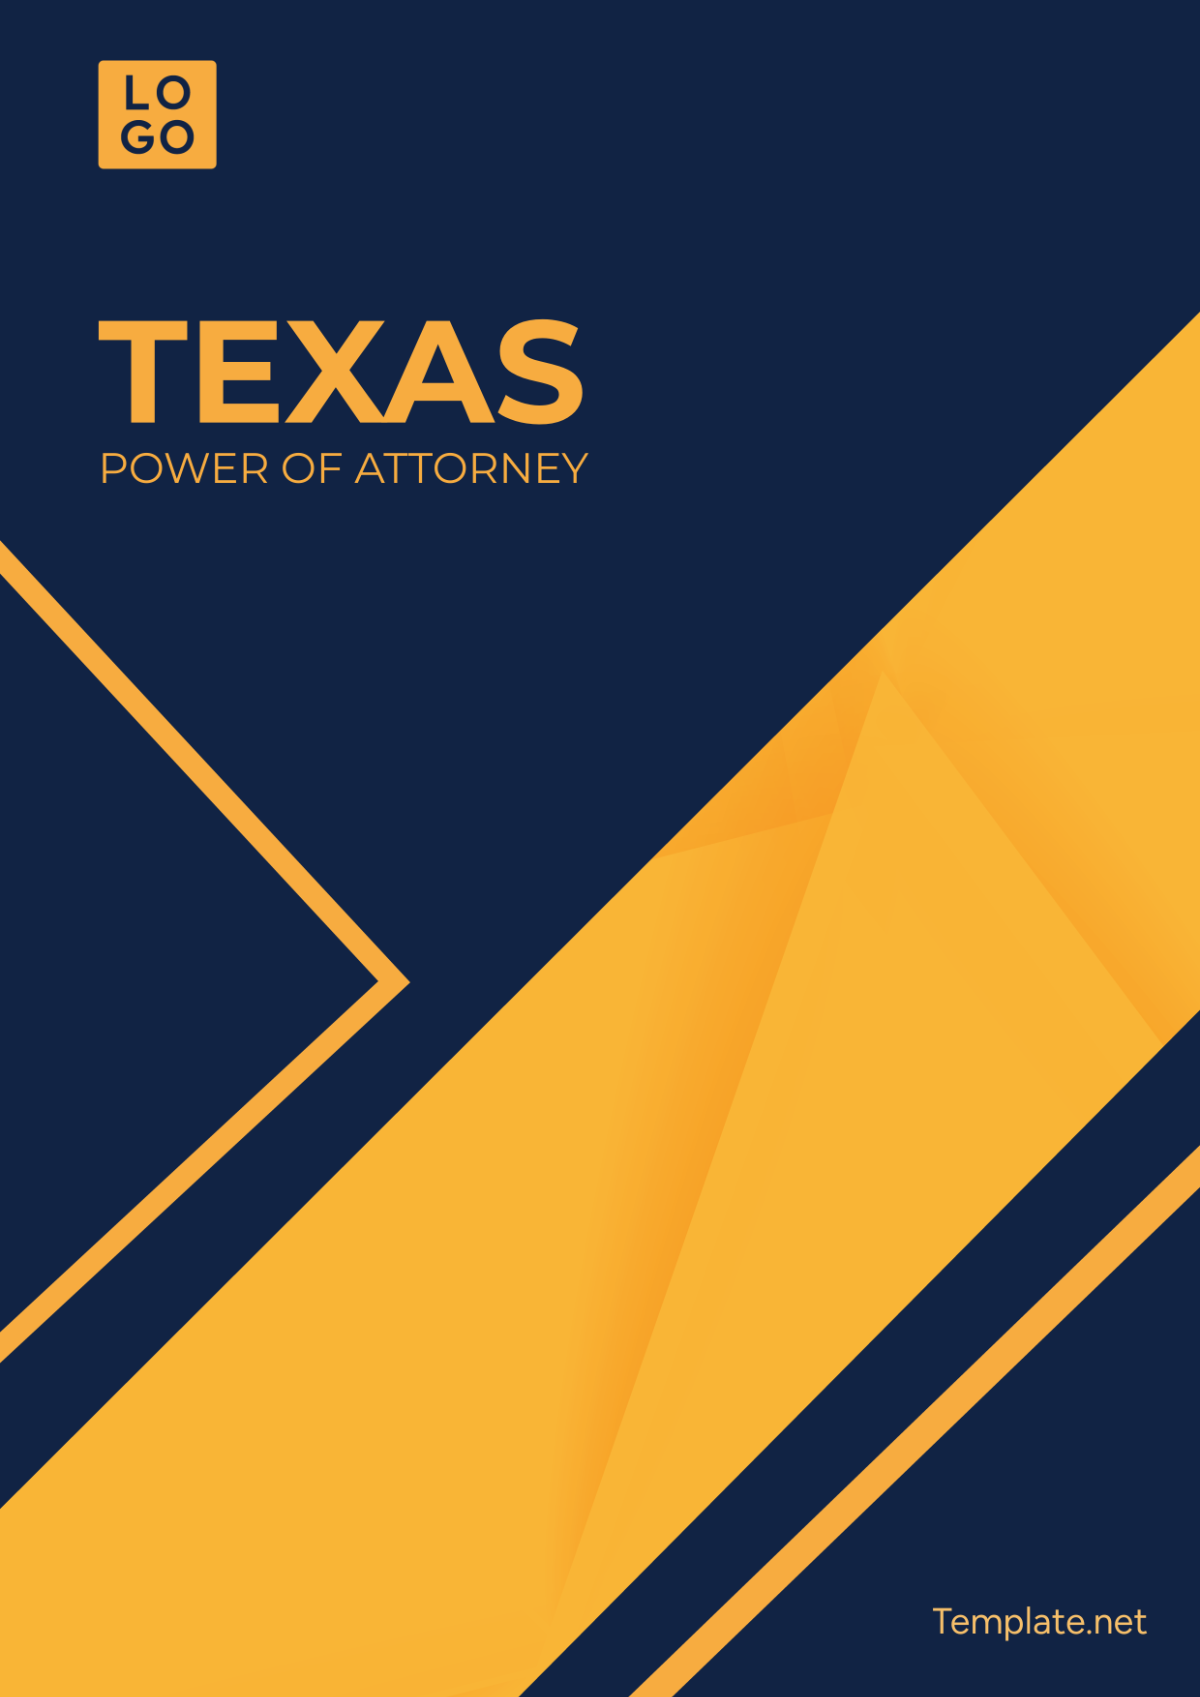 Texas Power of Attorney Cover Page Template